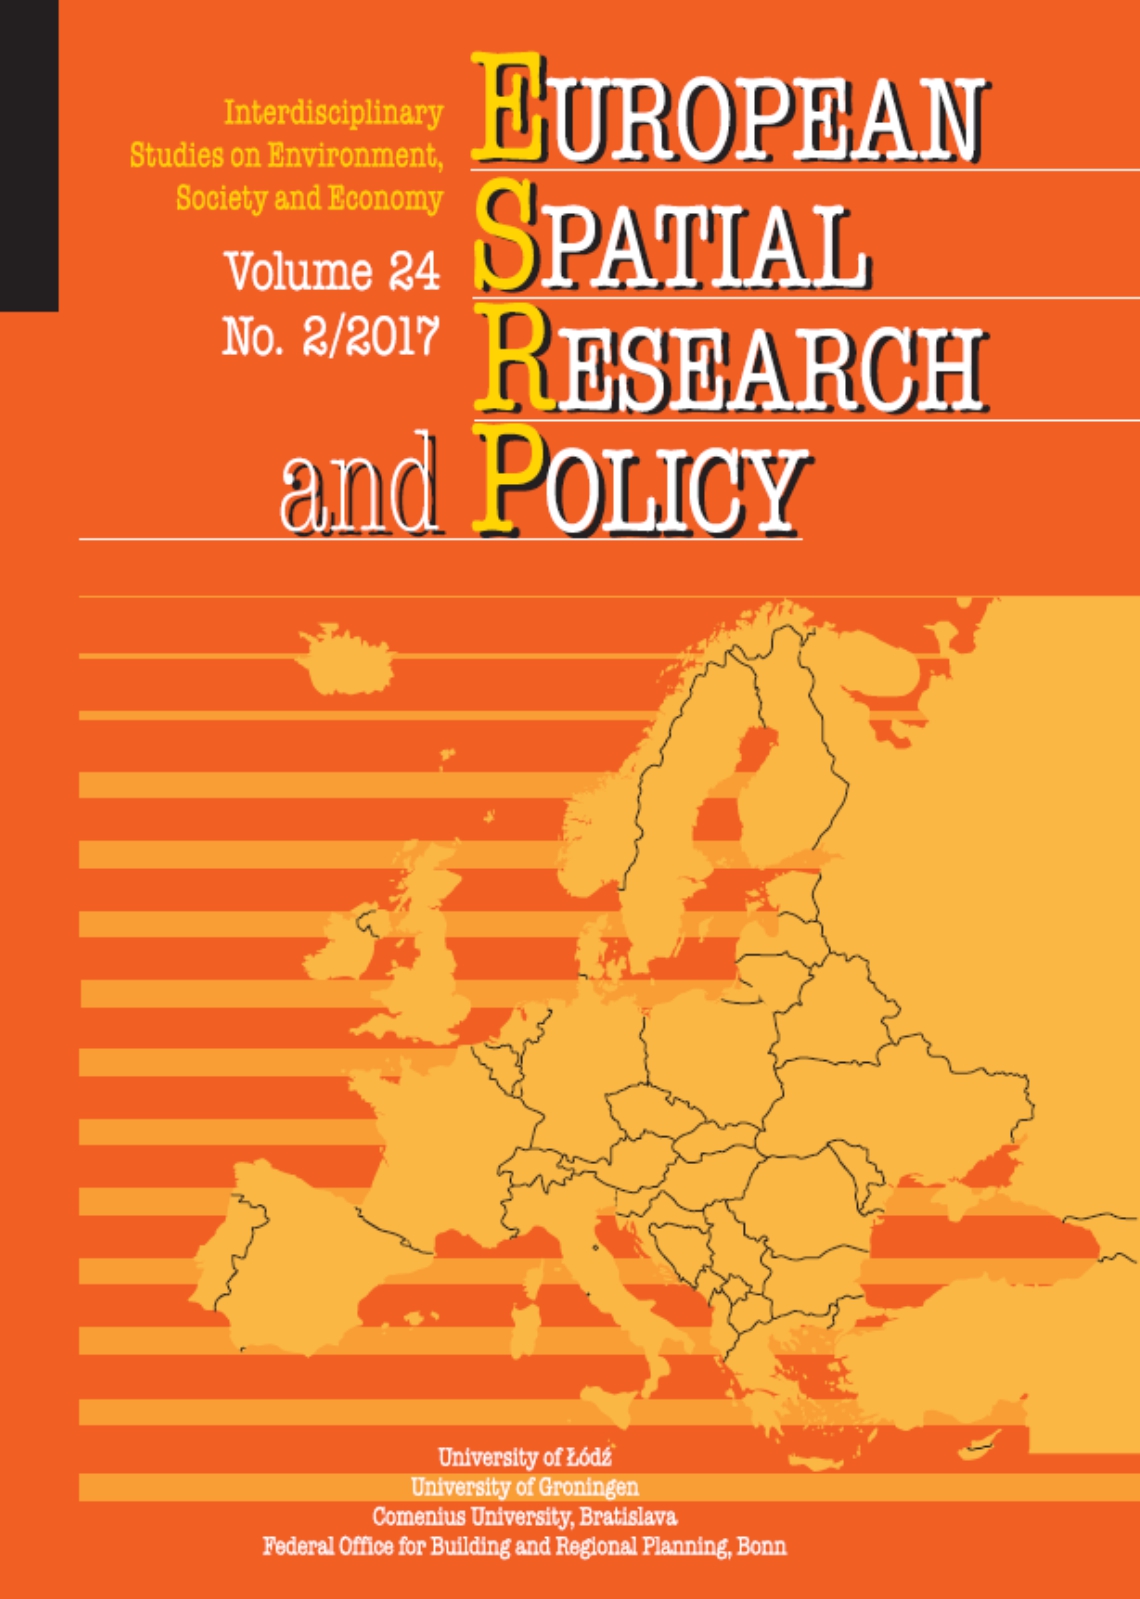 THE (RE-)PRODUCTION OF PERIPHERALITY IN CENTRAL AND EASTERN EUROPE